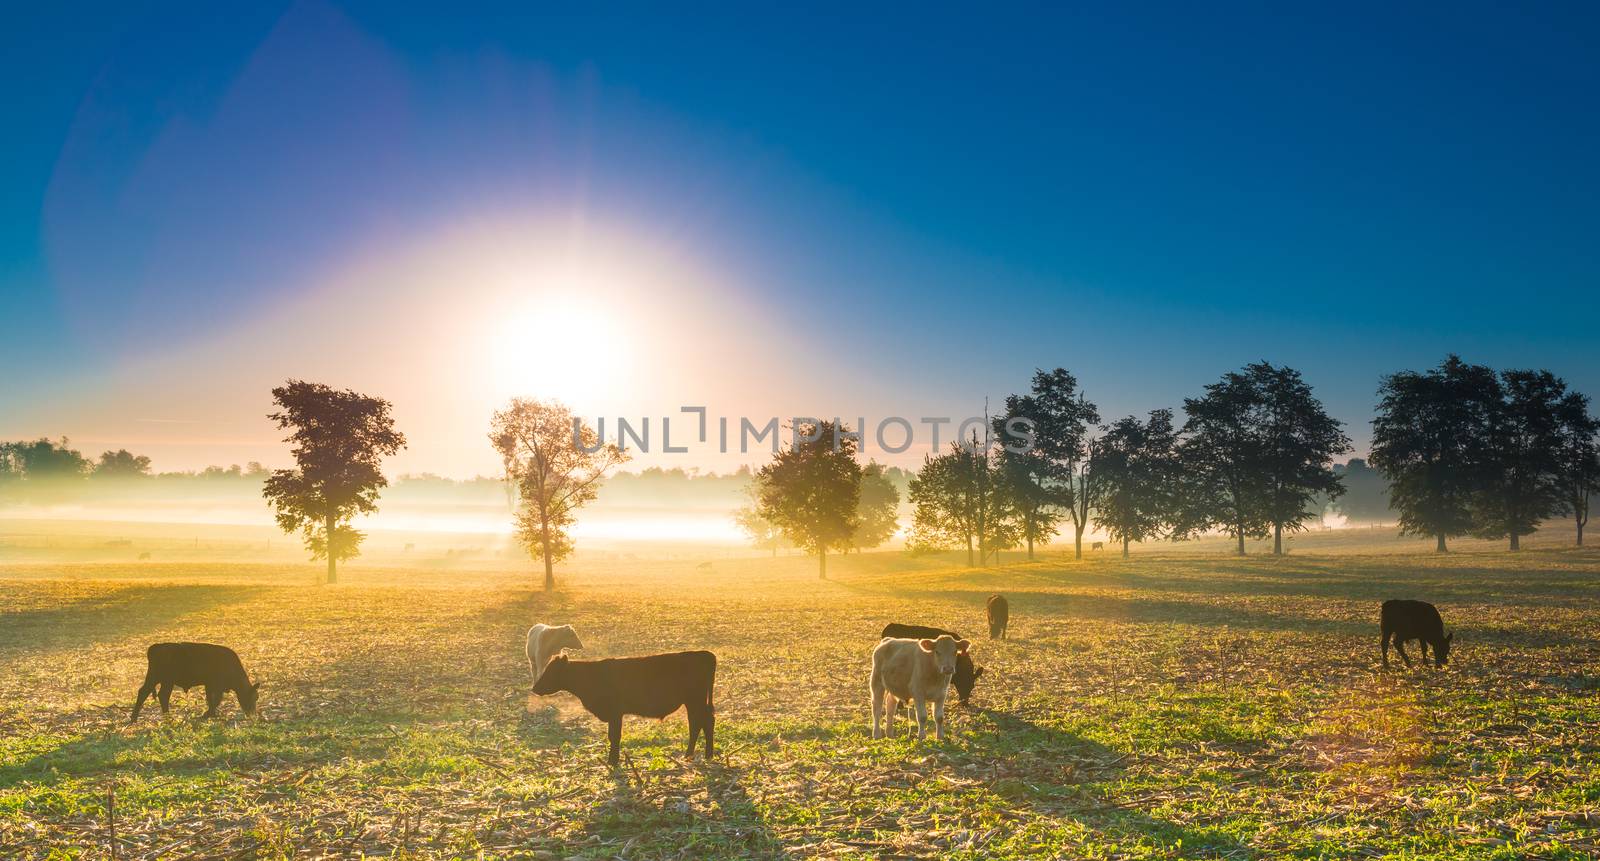 Cows grazing in the early morning fog.